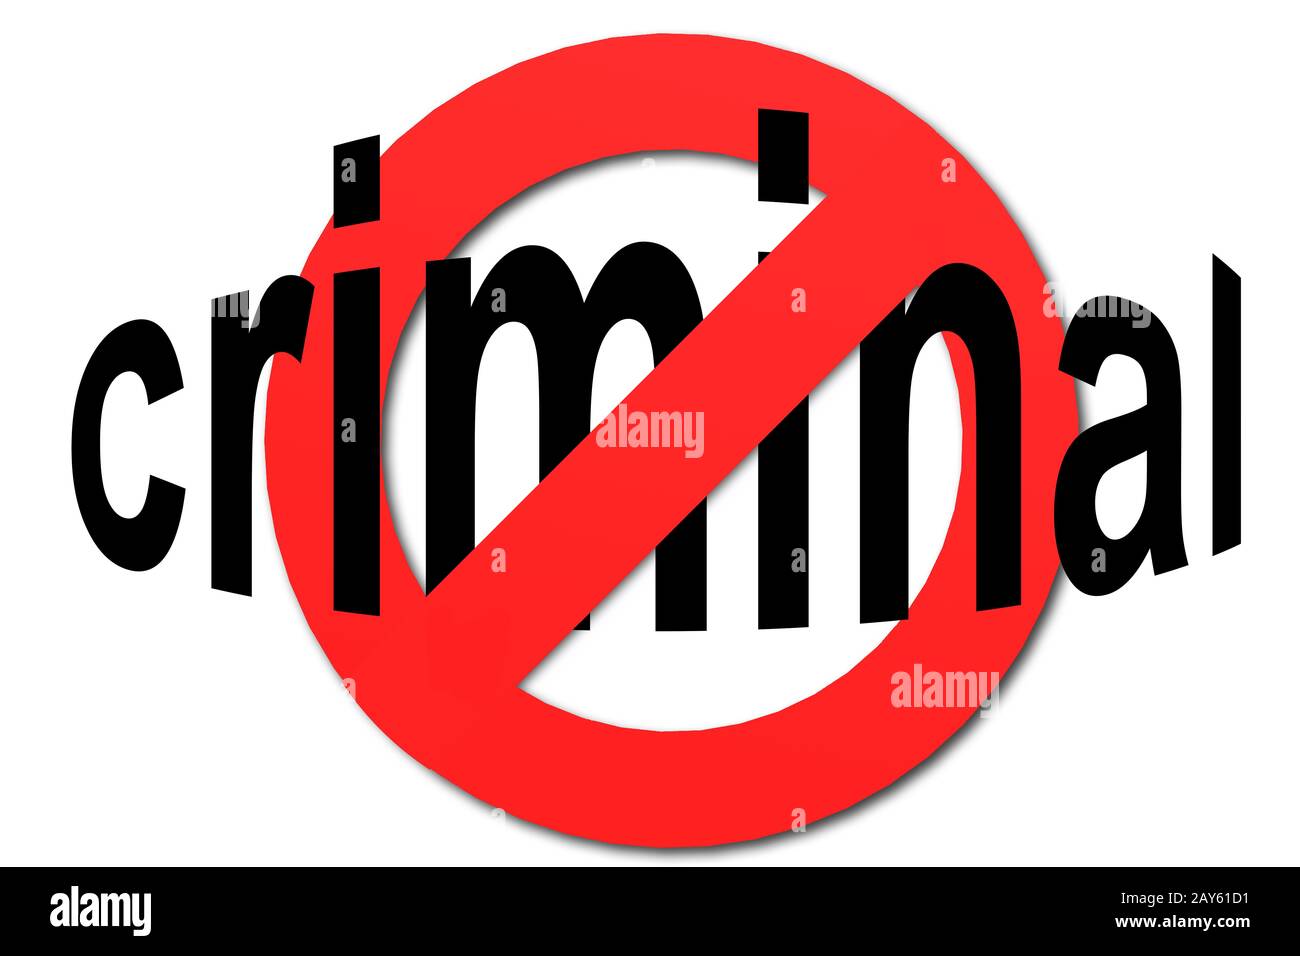 Stop criminal sign in red Stock Photo